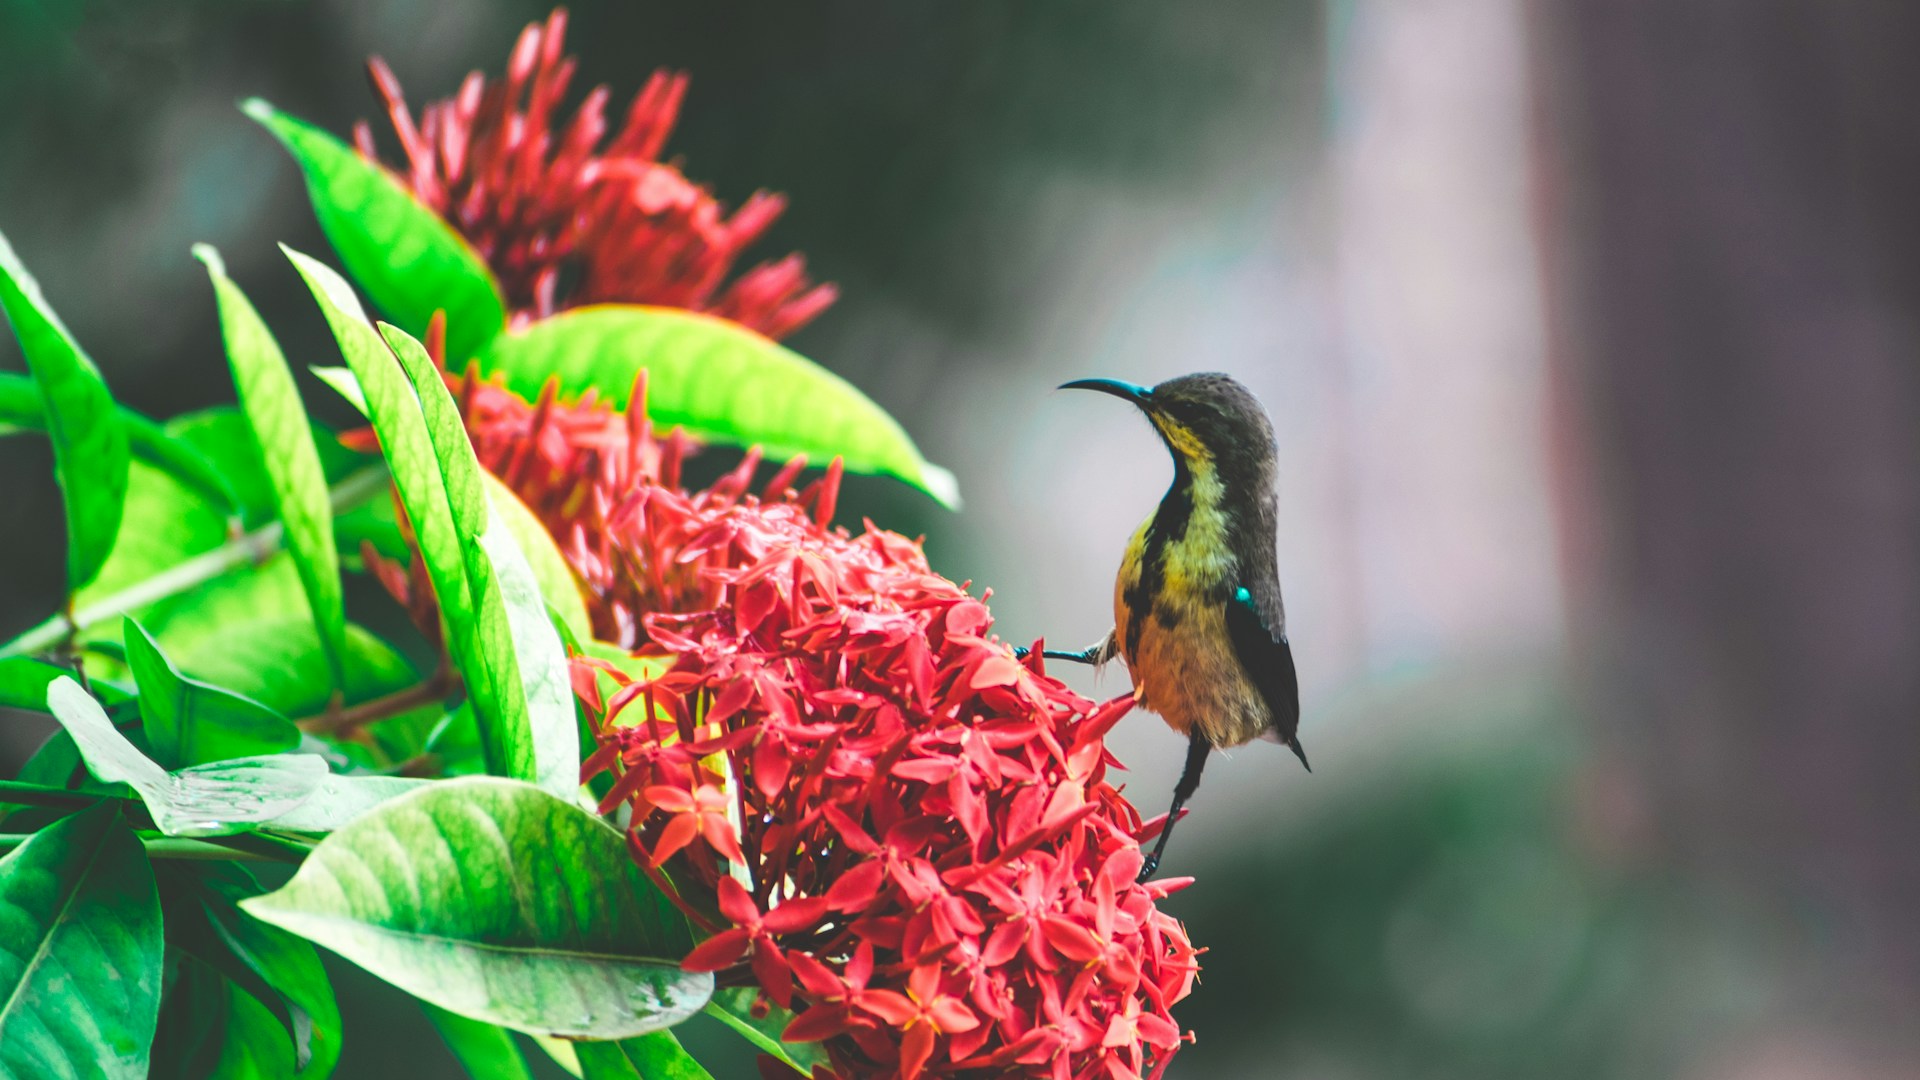 Tropical Birds and Flowers Wallpaper 1920x1080